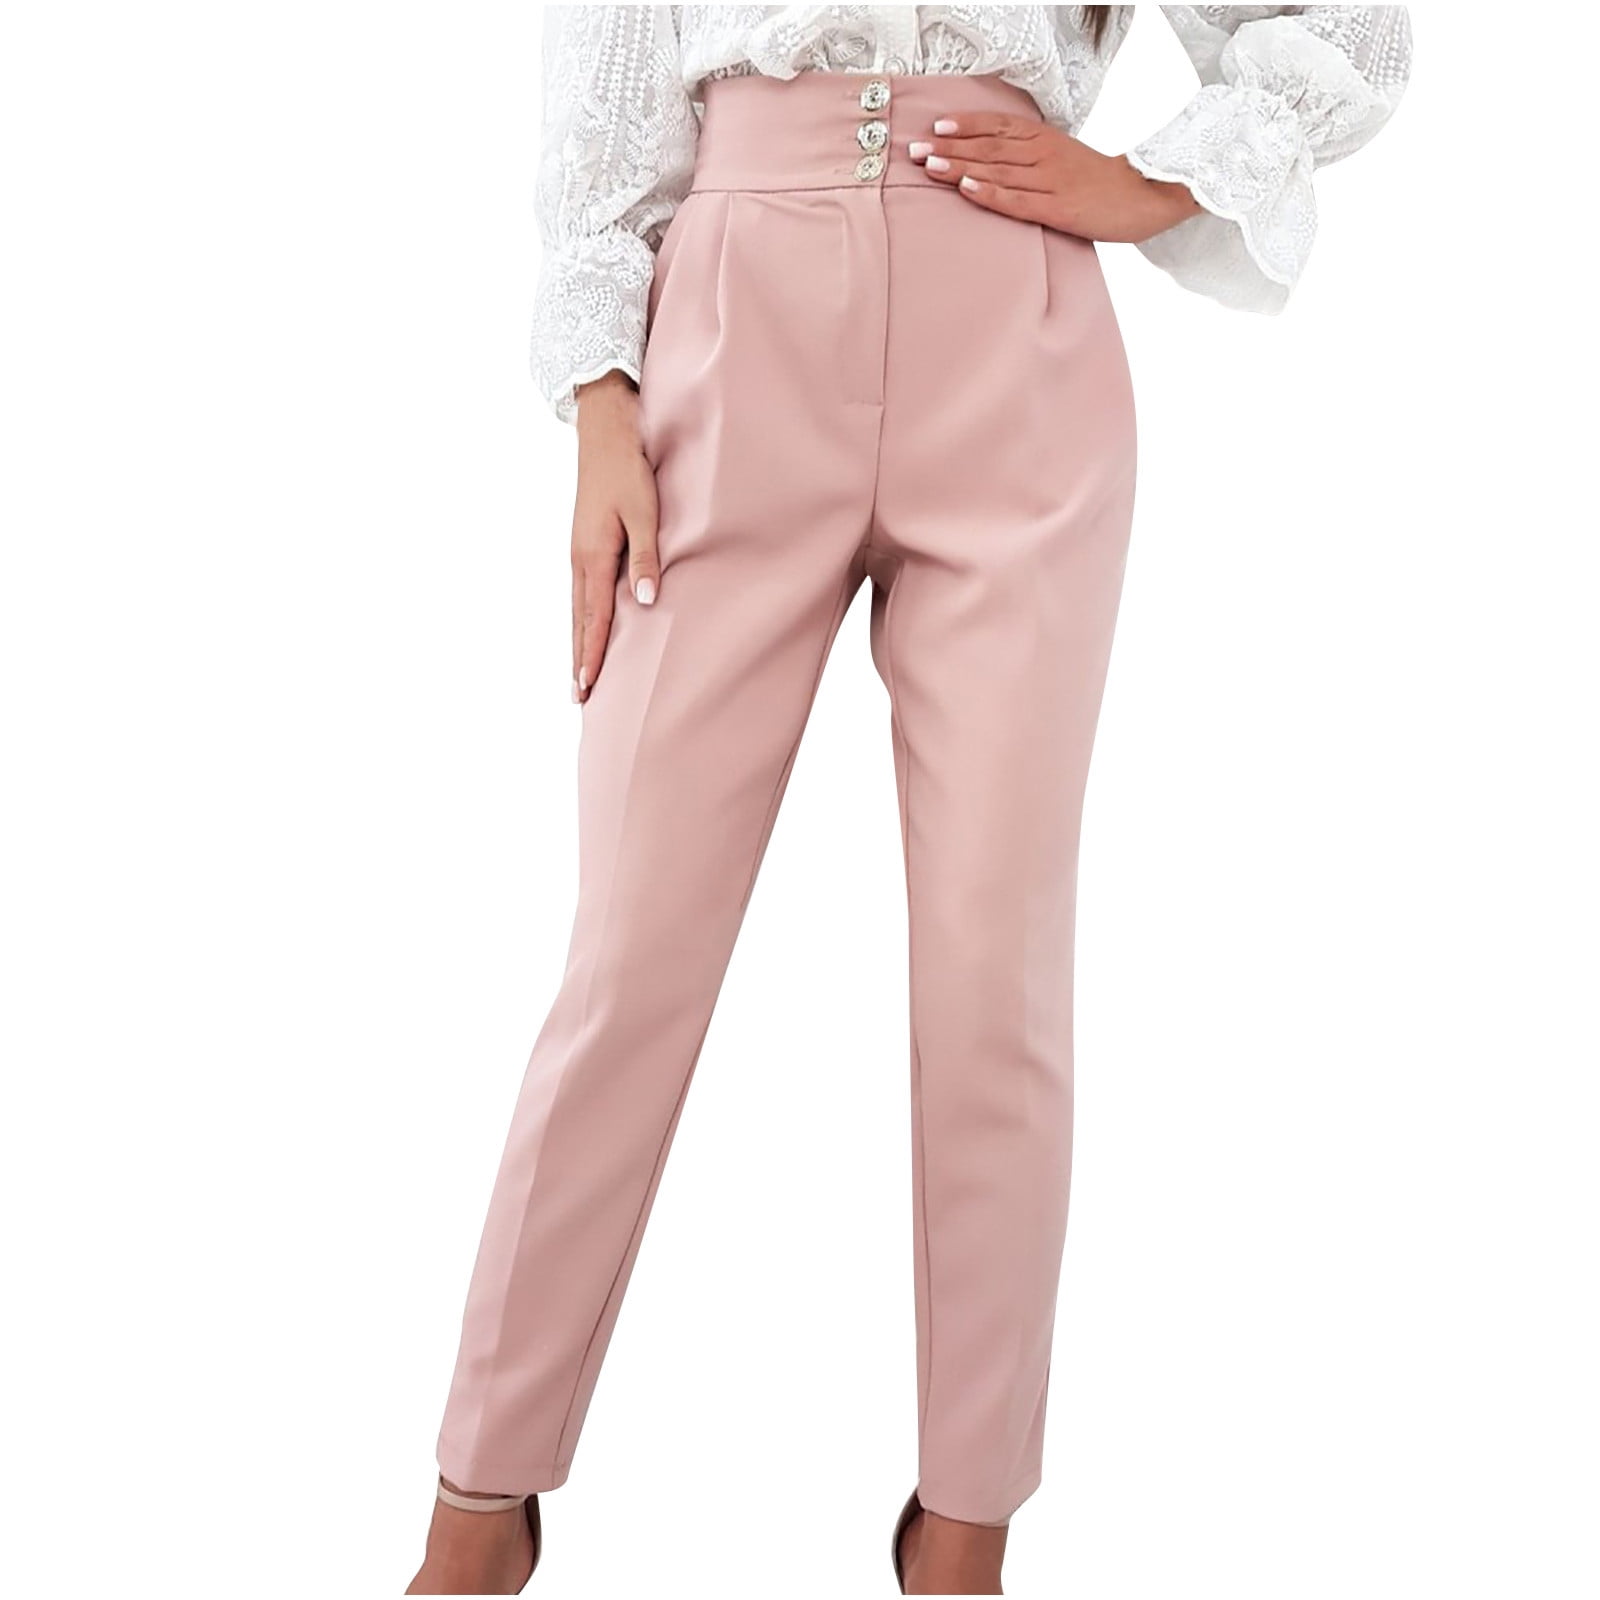 Womens Solid Casual Work Trousers High Waist Tapered Suit Pants with Pockets for Office Business Casual 70b9215b 83c0 4dbe 8286 307dfea39d76.4aa288eae485a0e64f5ff4c4251317b0